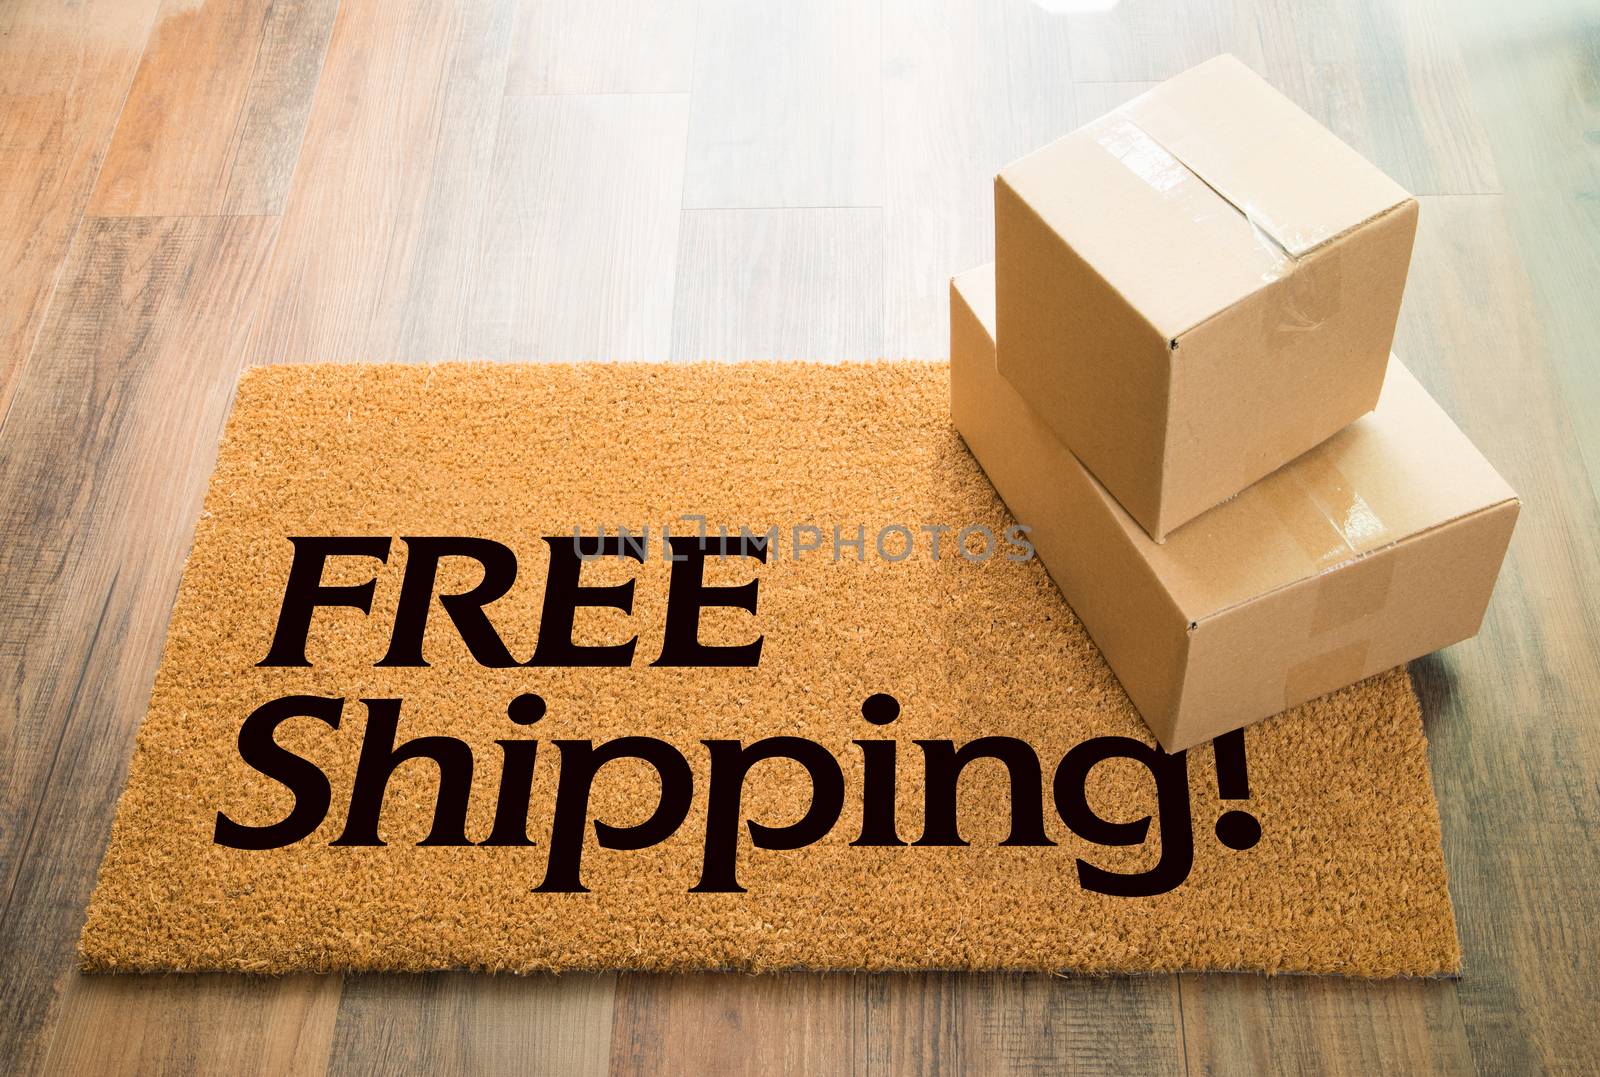 Free Shipping Welcome Mat On Wood Floor With Shipment of Boxes.